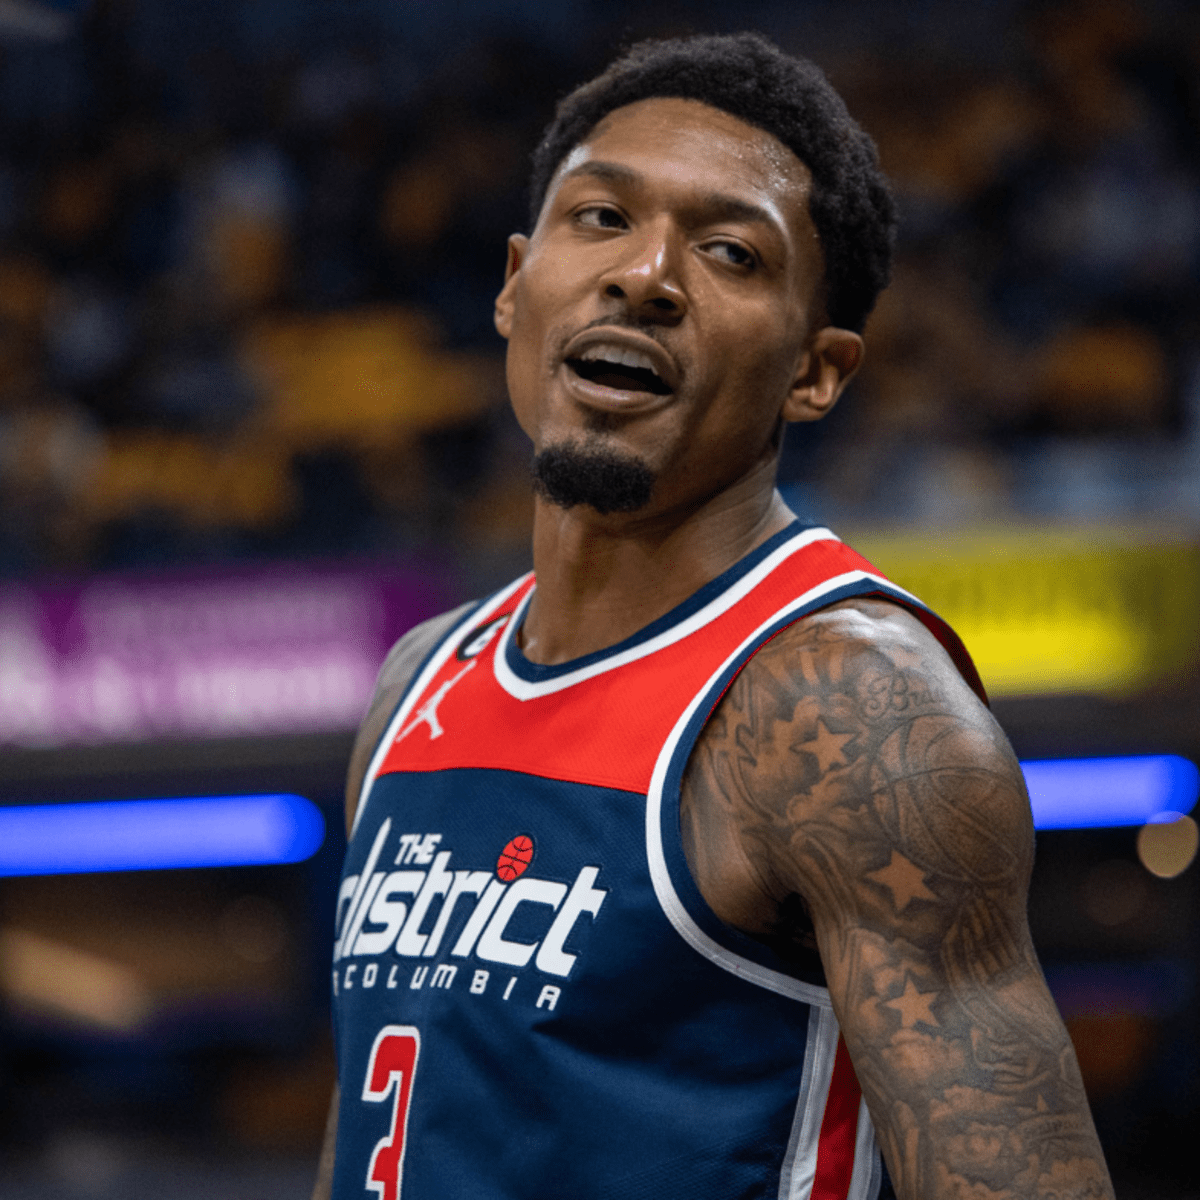 Bradley Beal, Phoenix Suns Rumors: Bradley Beal Likely to Move to the Brooklyn Nets